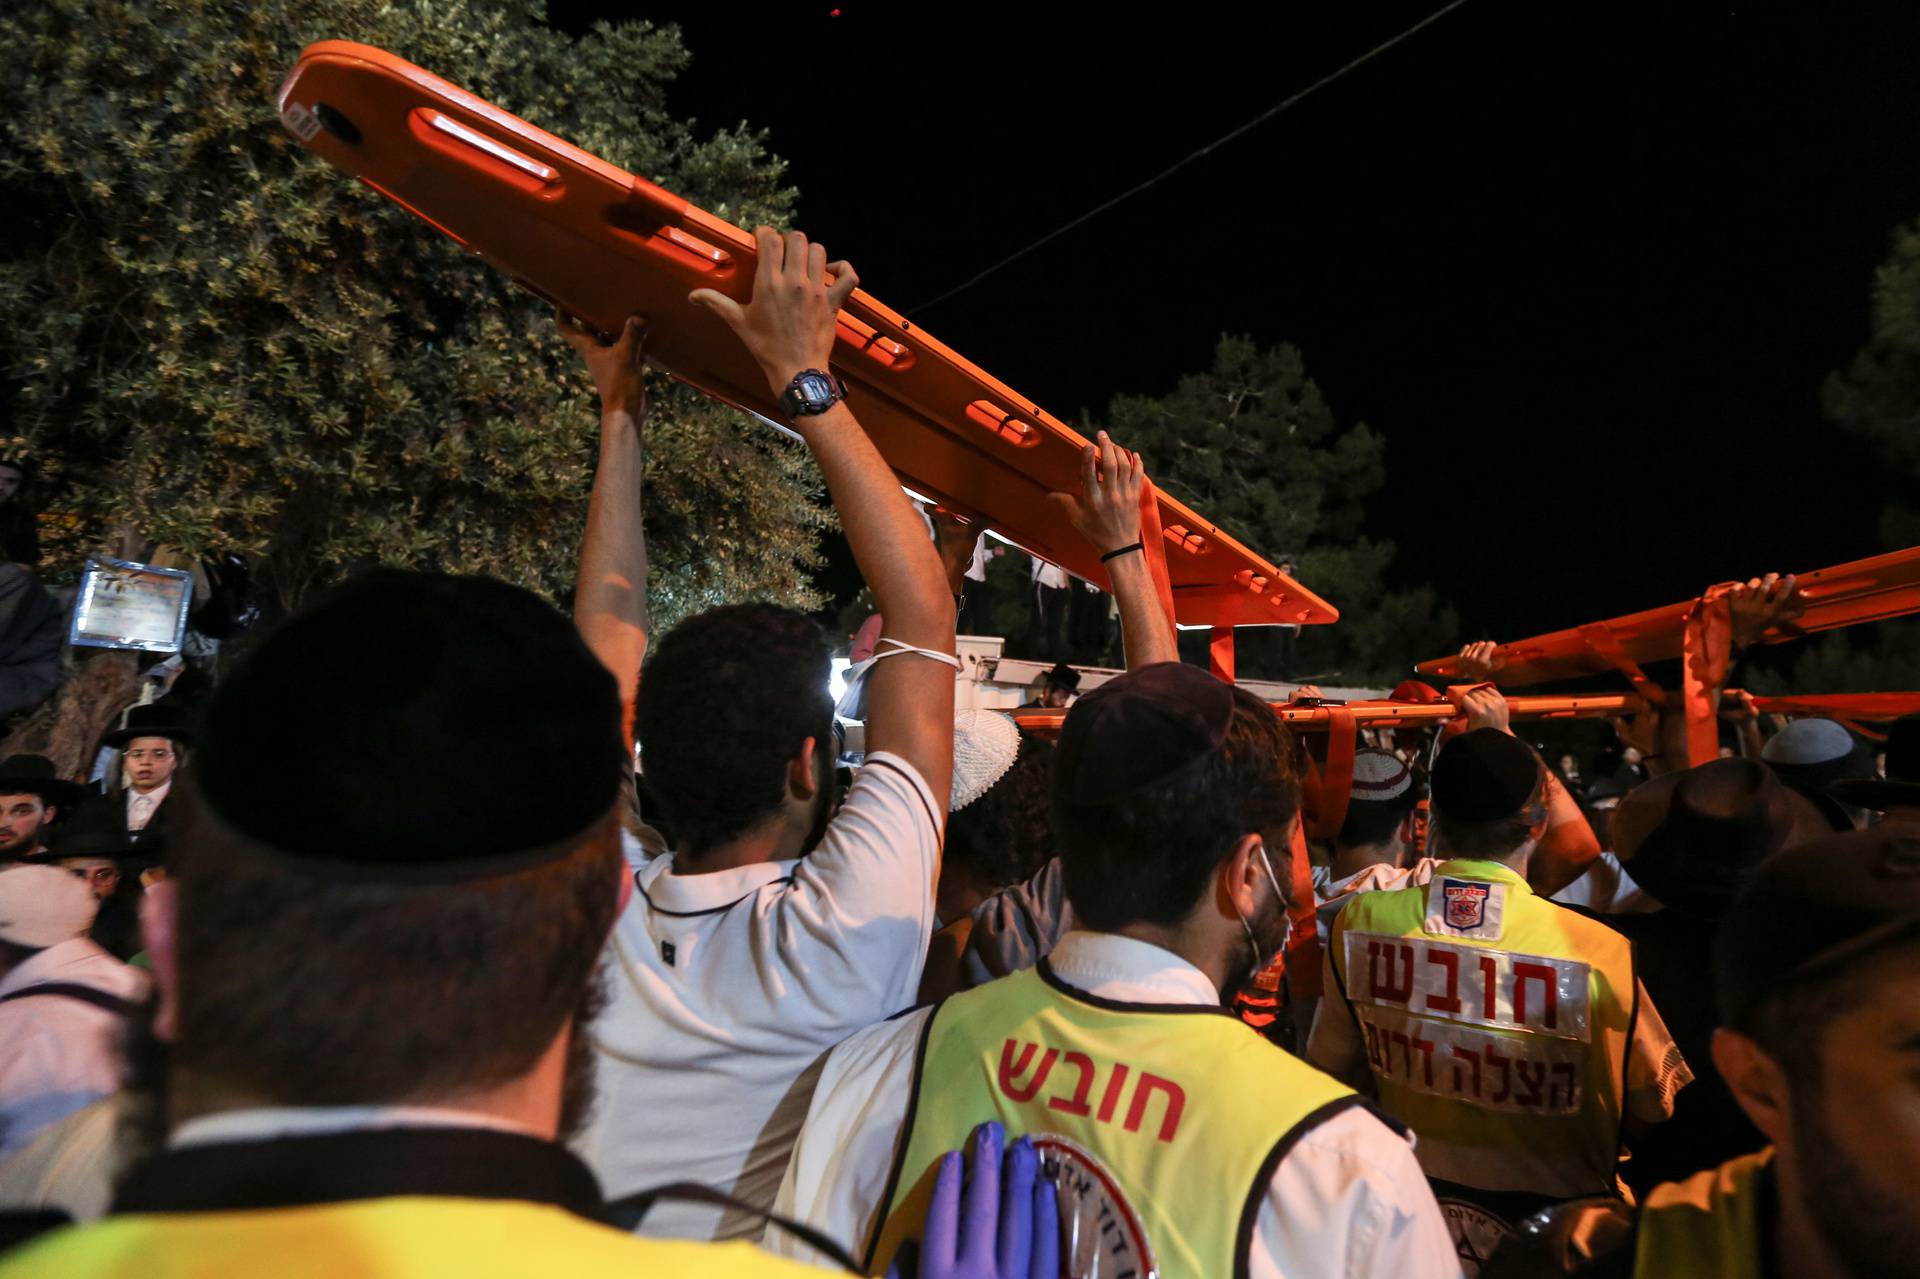 Medics and rescue workers carry stretchers at the Lag B'Omer event in Mount Meron, northern Israel, where fatalities were reported among the thousands of ultra-Orthodox Jews gathered